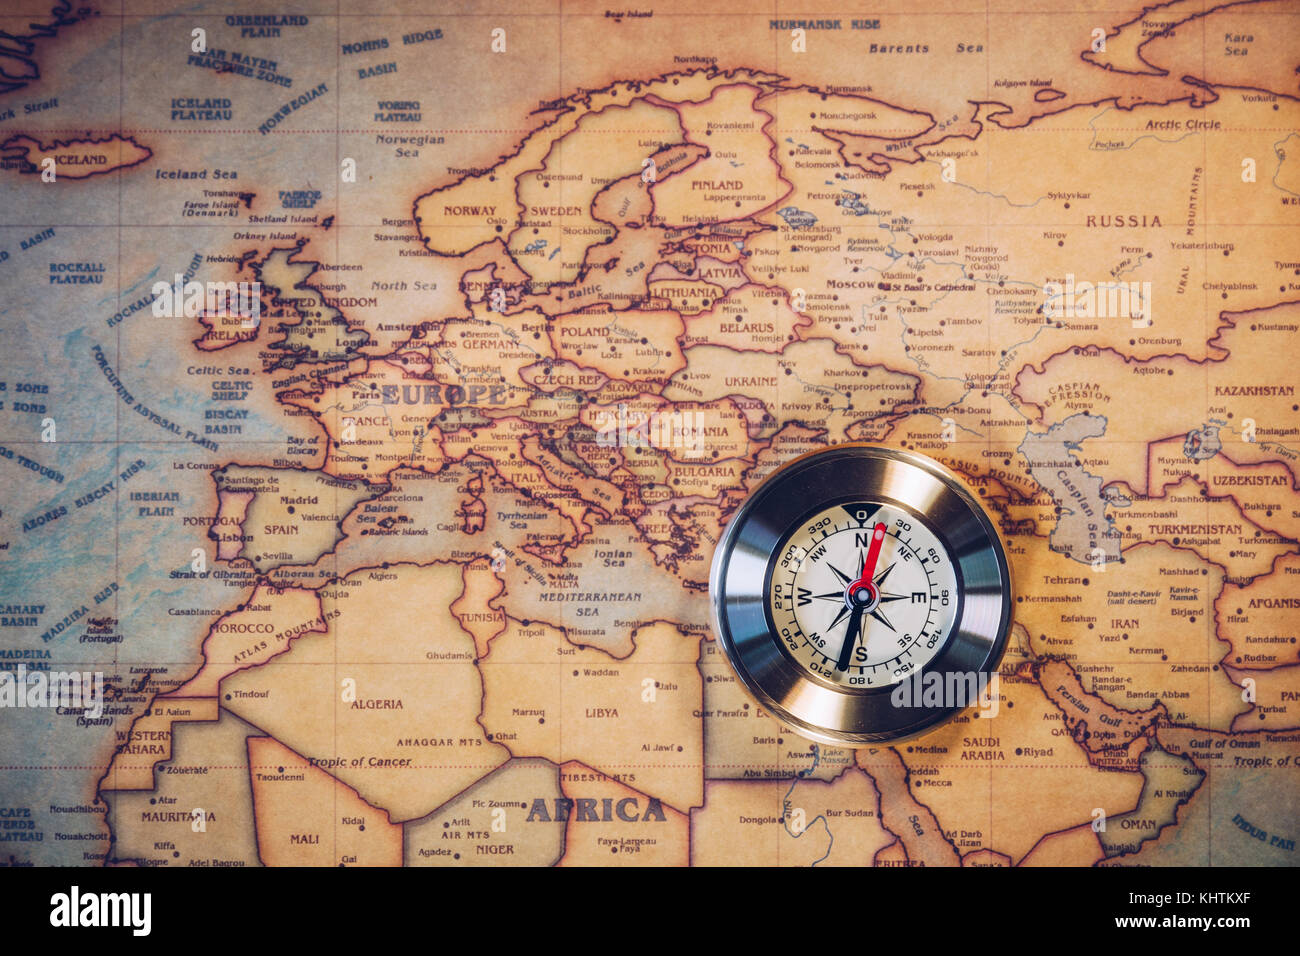 Old compass on vintage map. Adventure stories background. Retro style. The map used for background is in Public domain. Map source: Library of Congres Stock Photo